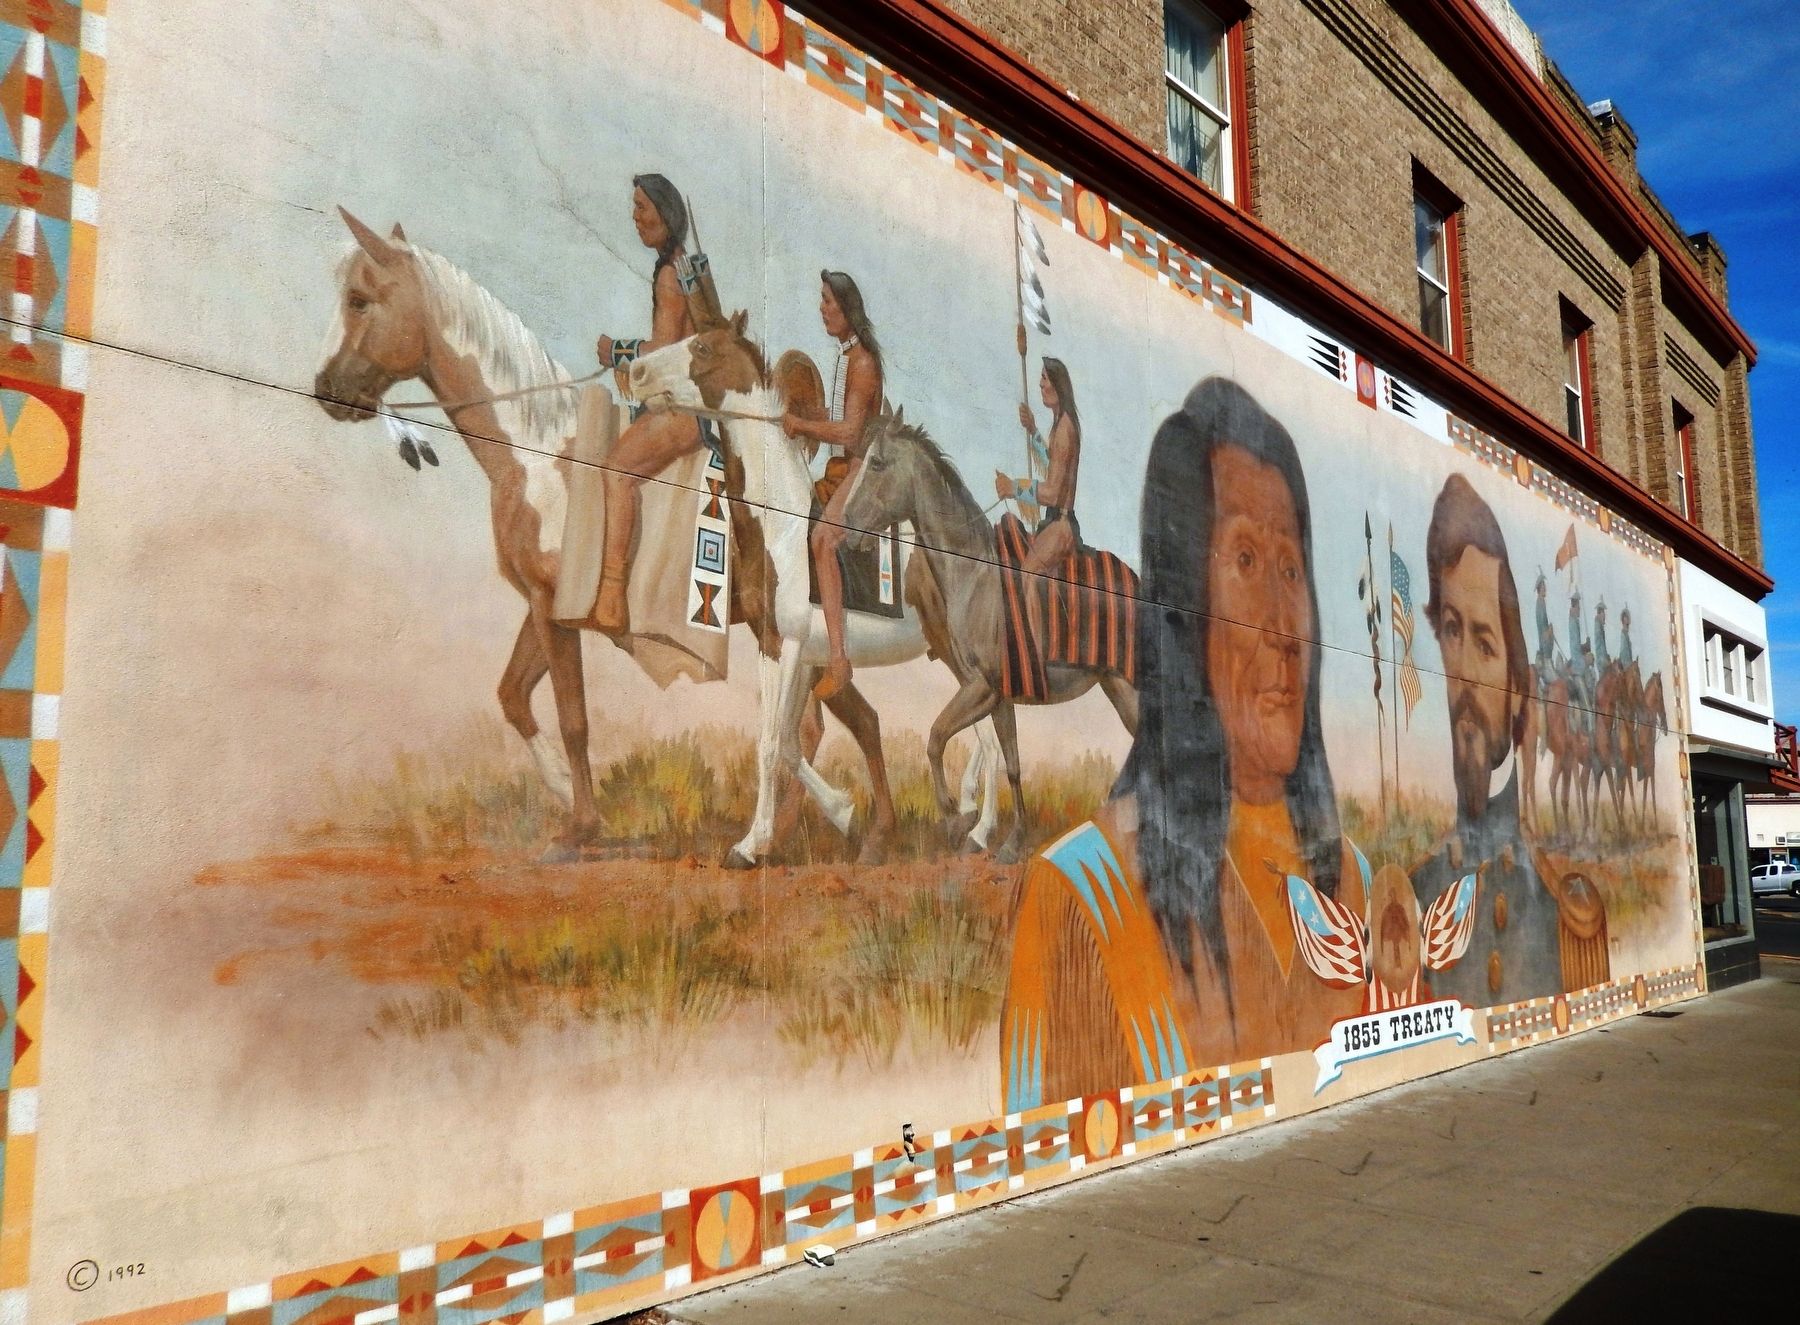 Treaty of 1855 Mural (<i>painted on building; adjacent to marker</i>) image. Click for full size.